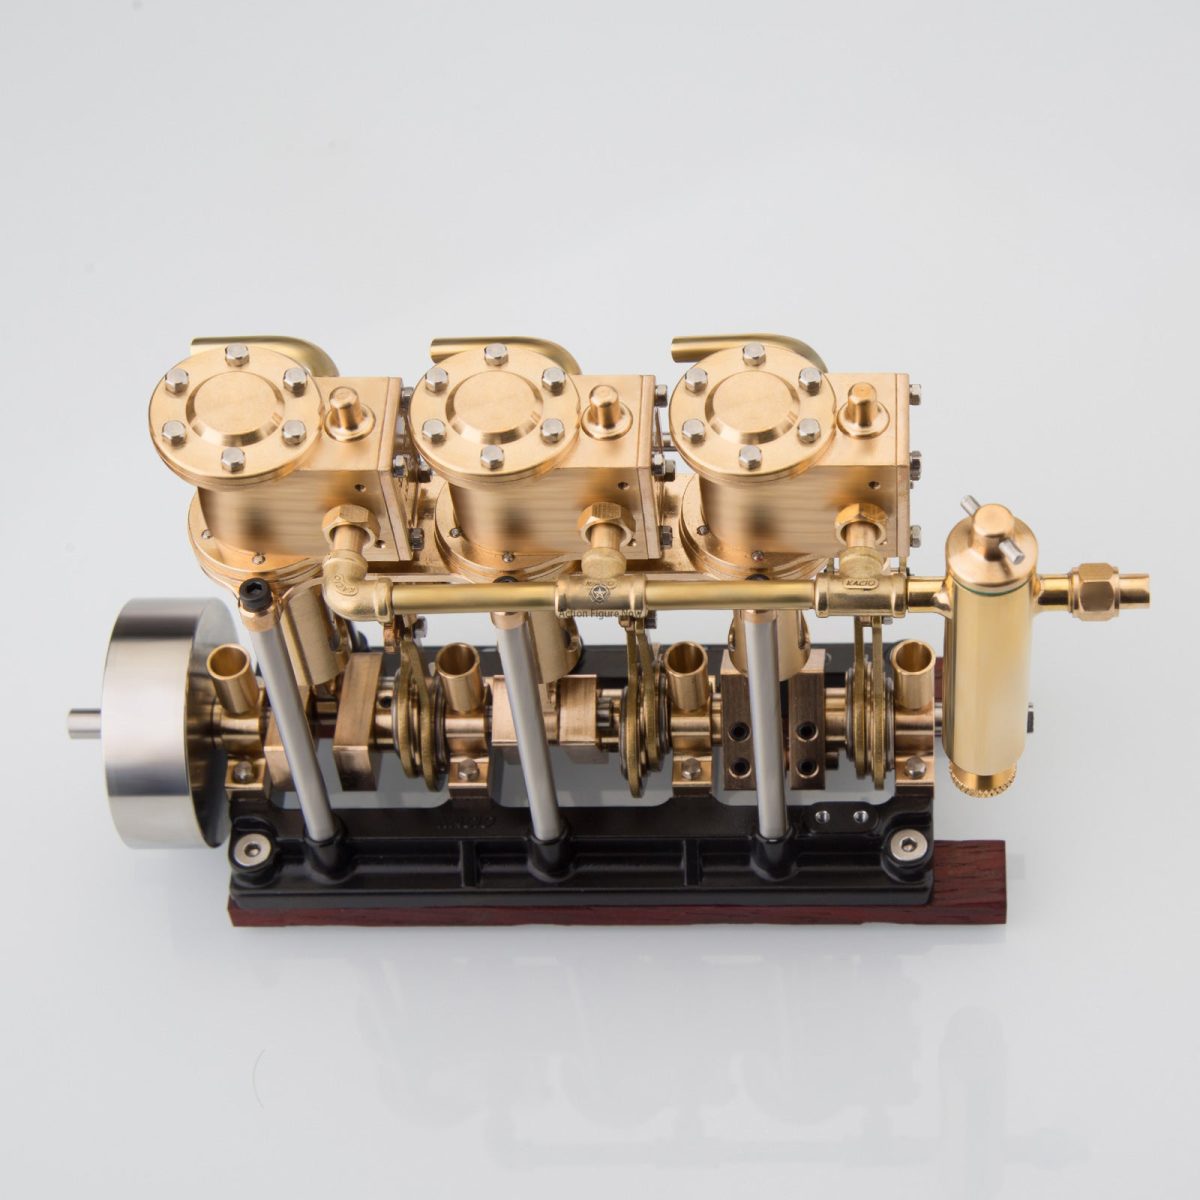 KACIO LS3-13S Three-Cylinder Steam Engine Model with Oil Cup and Forward/Reverse Rotation Capability